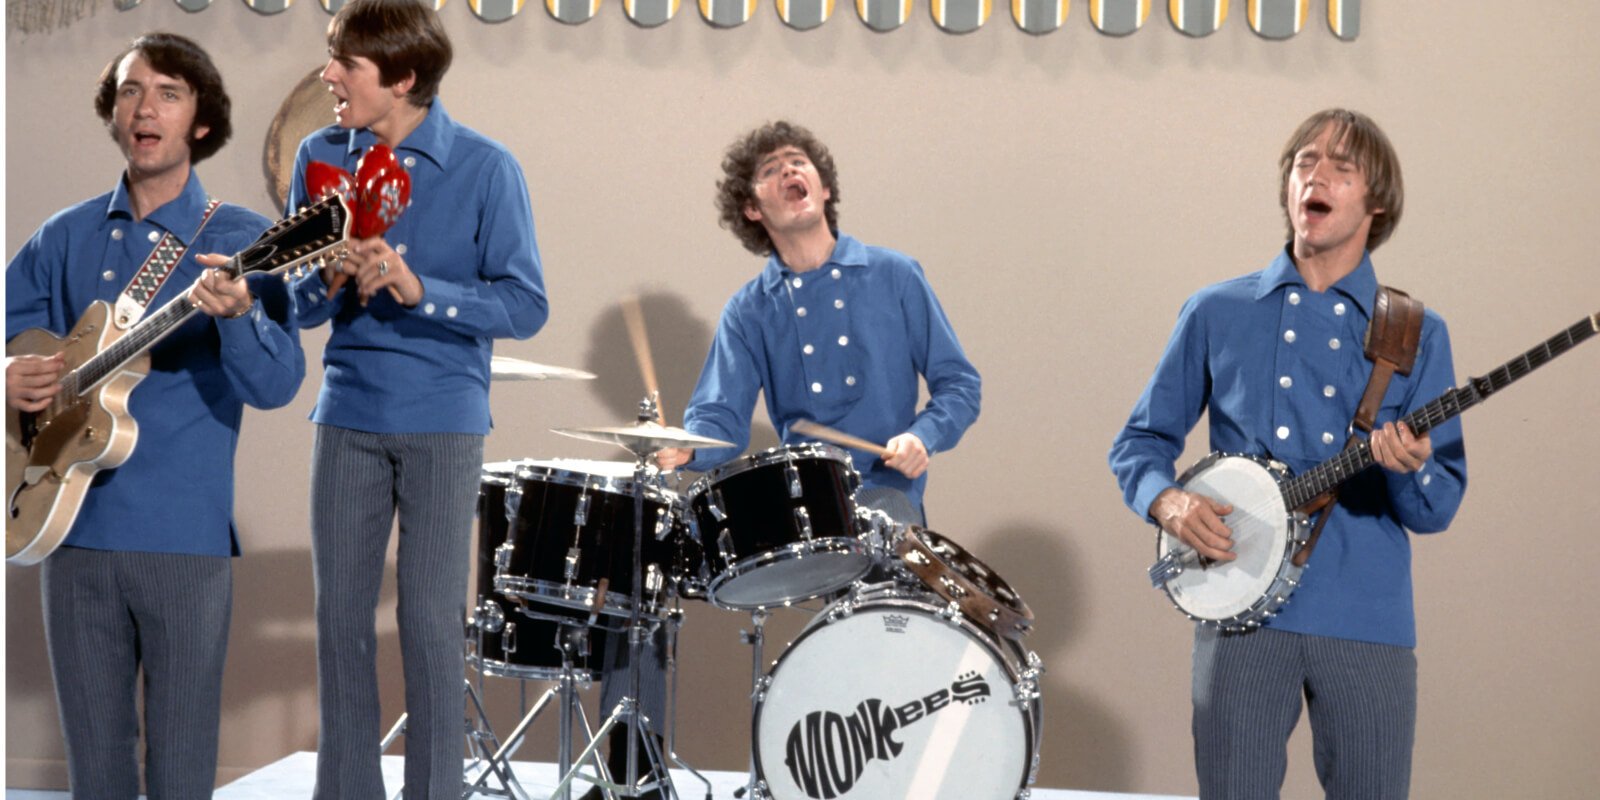 The Monkees members included Mike Nesmith, Davy Jones, Micky Dolenz and Peter Tork.